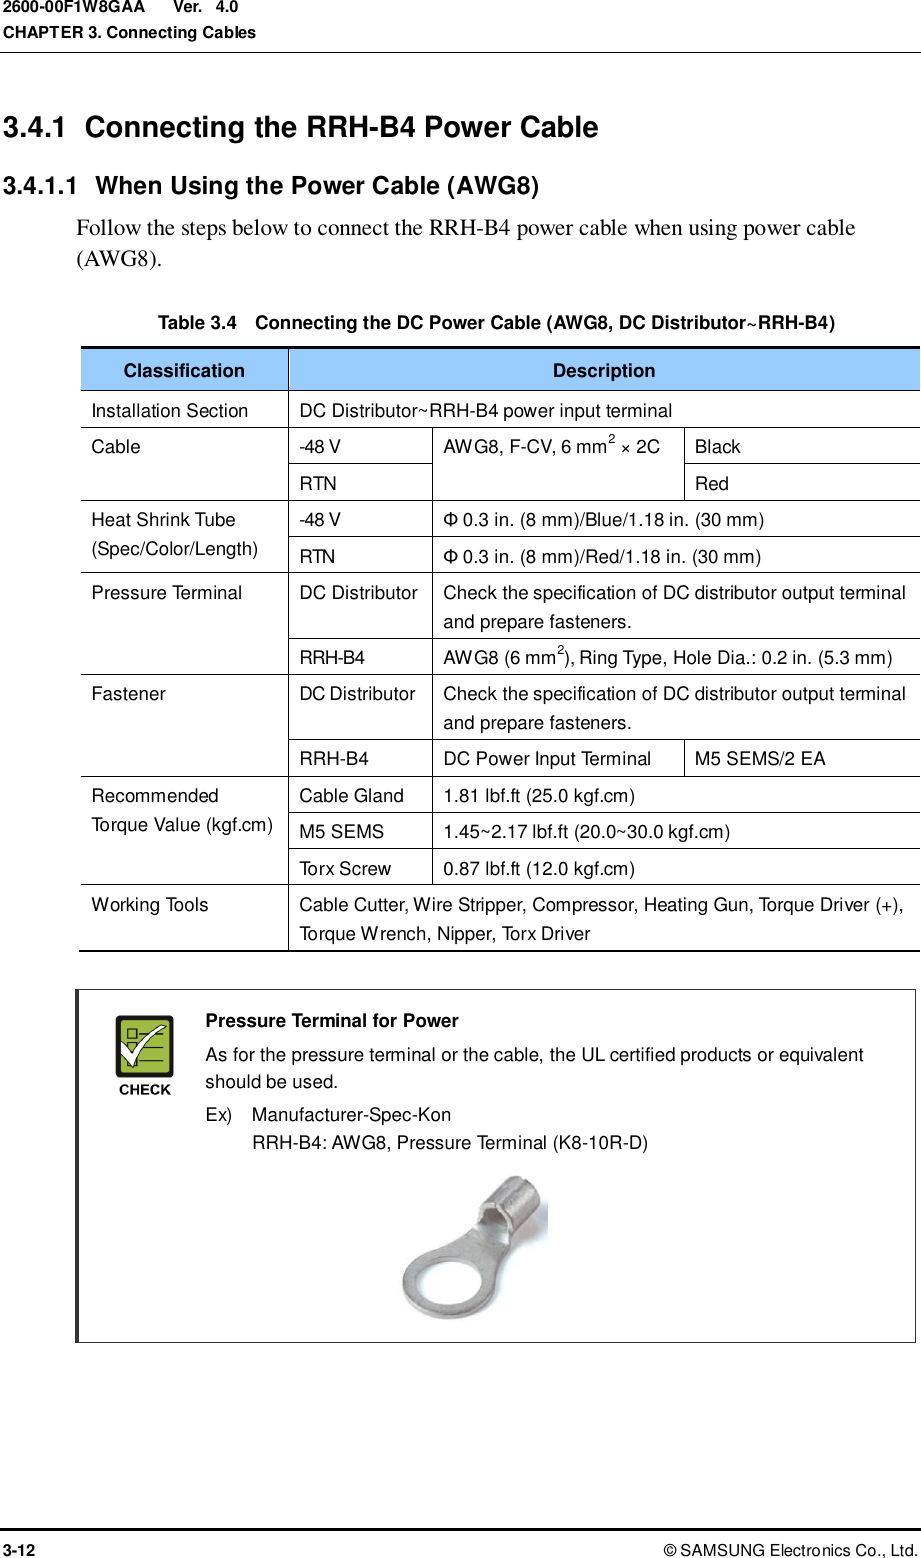  Ver.  CHAPTER 3. Connecting Cables 3-12 ©  SAMSUNG Electronics Co., Ltd. 2600-00F1W8GAA 4.0 3.4.1  Connecting the RRH-B4 Power Cable 3.4.1.1  When Using the Power Cable (AWG8) Follow the steps below to connect the RRH-B4 power cable when using power cable (AWG8).  Table 3.4  Connecting the DC Power Cable (AWG8, DC Distributor~RRH-B4) Classification Description Installation Section DC Distributor~RRH-B4 power input terminal Cable -48 V AWG8, F-CV, 6 mm2 × 2C Black RTN Red Heat Shrink Tube (Spec/Color/Length) -48 V Φ 0.3 in. (8 mm)/Blue/1.18 in. (30 mm) RTN Φ 0.3 in. (8 mm)/Red/1.18 in. (30 mm) Pressure Terminal DC Distributor Check the specification of DC distributor output terminal and prepare fasteners. RRH-B4 AWG8 (6 mm2), Ring Type, Hole Dia.: 0.2 in. (5.3 mm) Fastener DC Distributor Check the specification of DC distributor output terminal and prepare fasteners. RRH-B4 DC Power Input Terminal M5 SEMS/2 EA Recommended Torque Value (kgf.cm) Cable Gland 1.81 lbf.ft (25.0 kgf.cm) M5 SEMS 1.45~2.17 lbf.ft (20.0~30.0 kgf.cm) Torx Screw 0.87 lbf.ft (12.0 kgf.cm) Working Tools Cable Cutter, Wire Stripper, Compressor, Heating Gun, Torque Driver (+), Torque Wrench, Nipper, Torx Driver   Pressure Terminal for Power   As for the pressure terminal or the cable, the UL certified products or equivalent should be used.   Ex)    Manufacturer-Spec-Kon RRH-B4: AWG8, Pressure Terminal (K8-10R-D)      